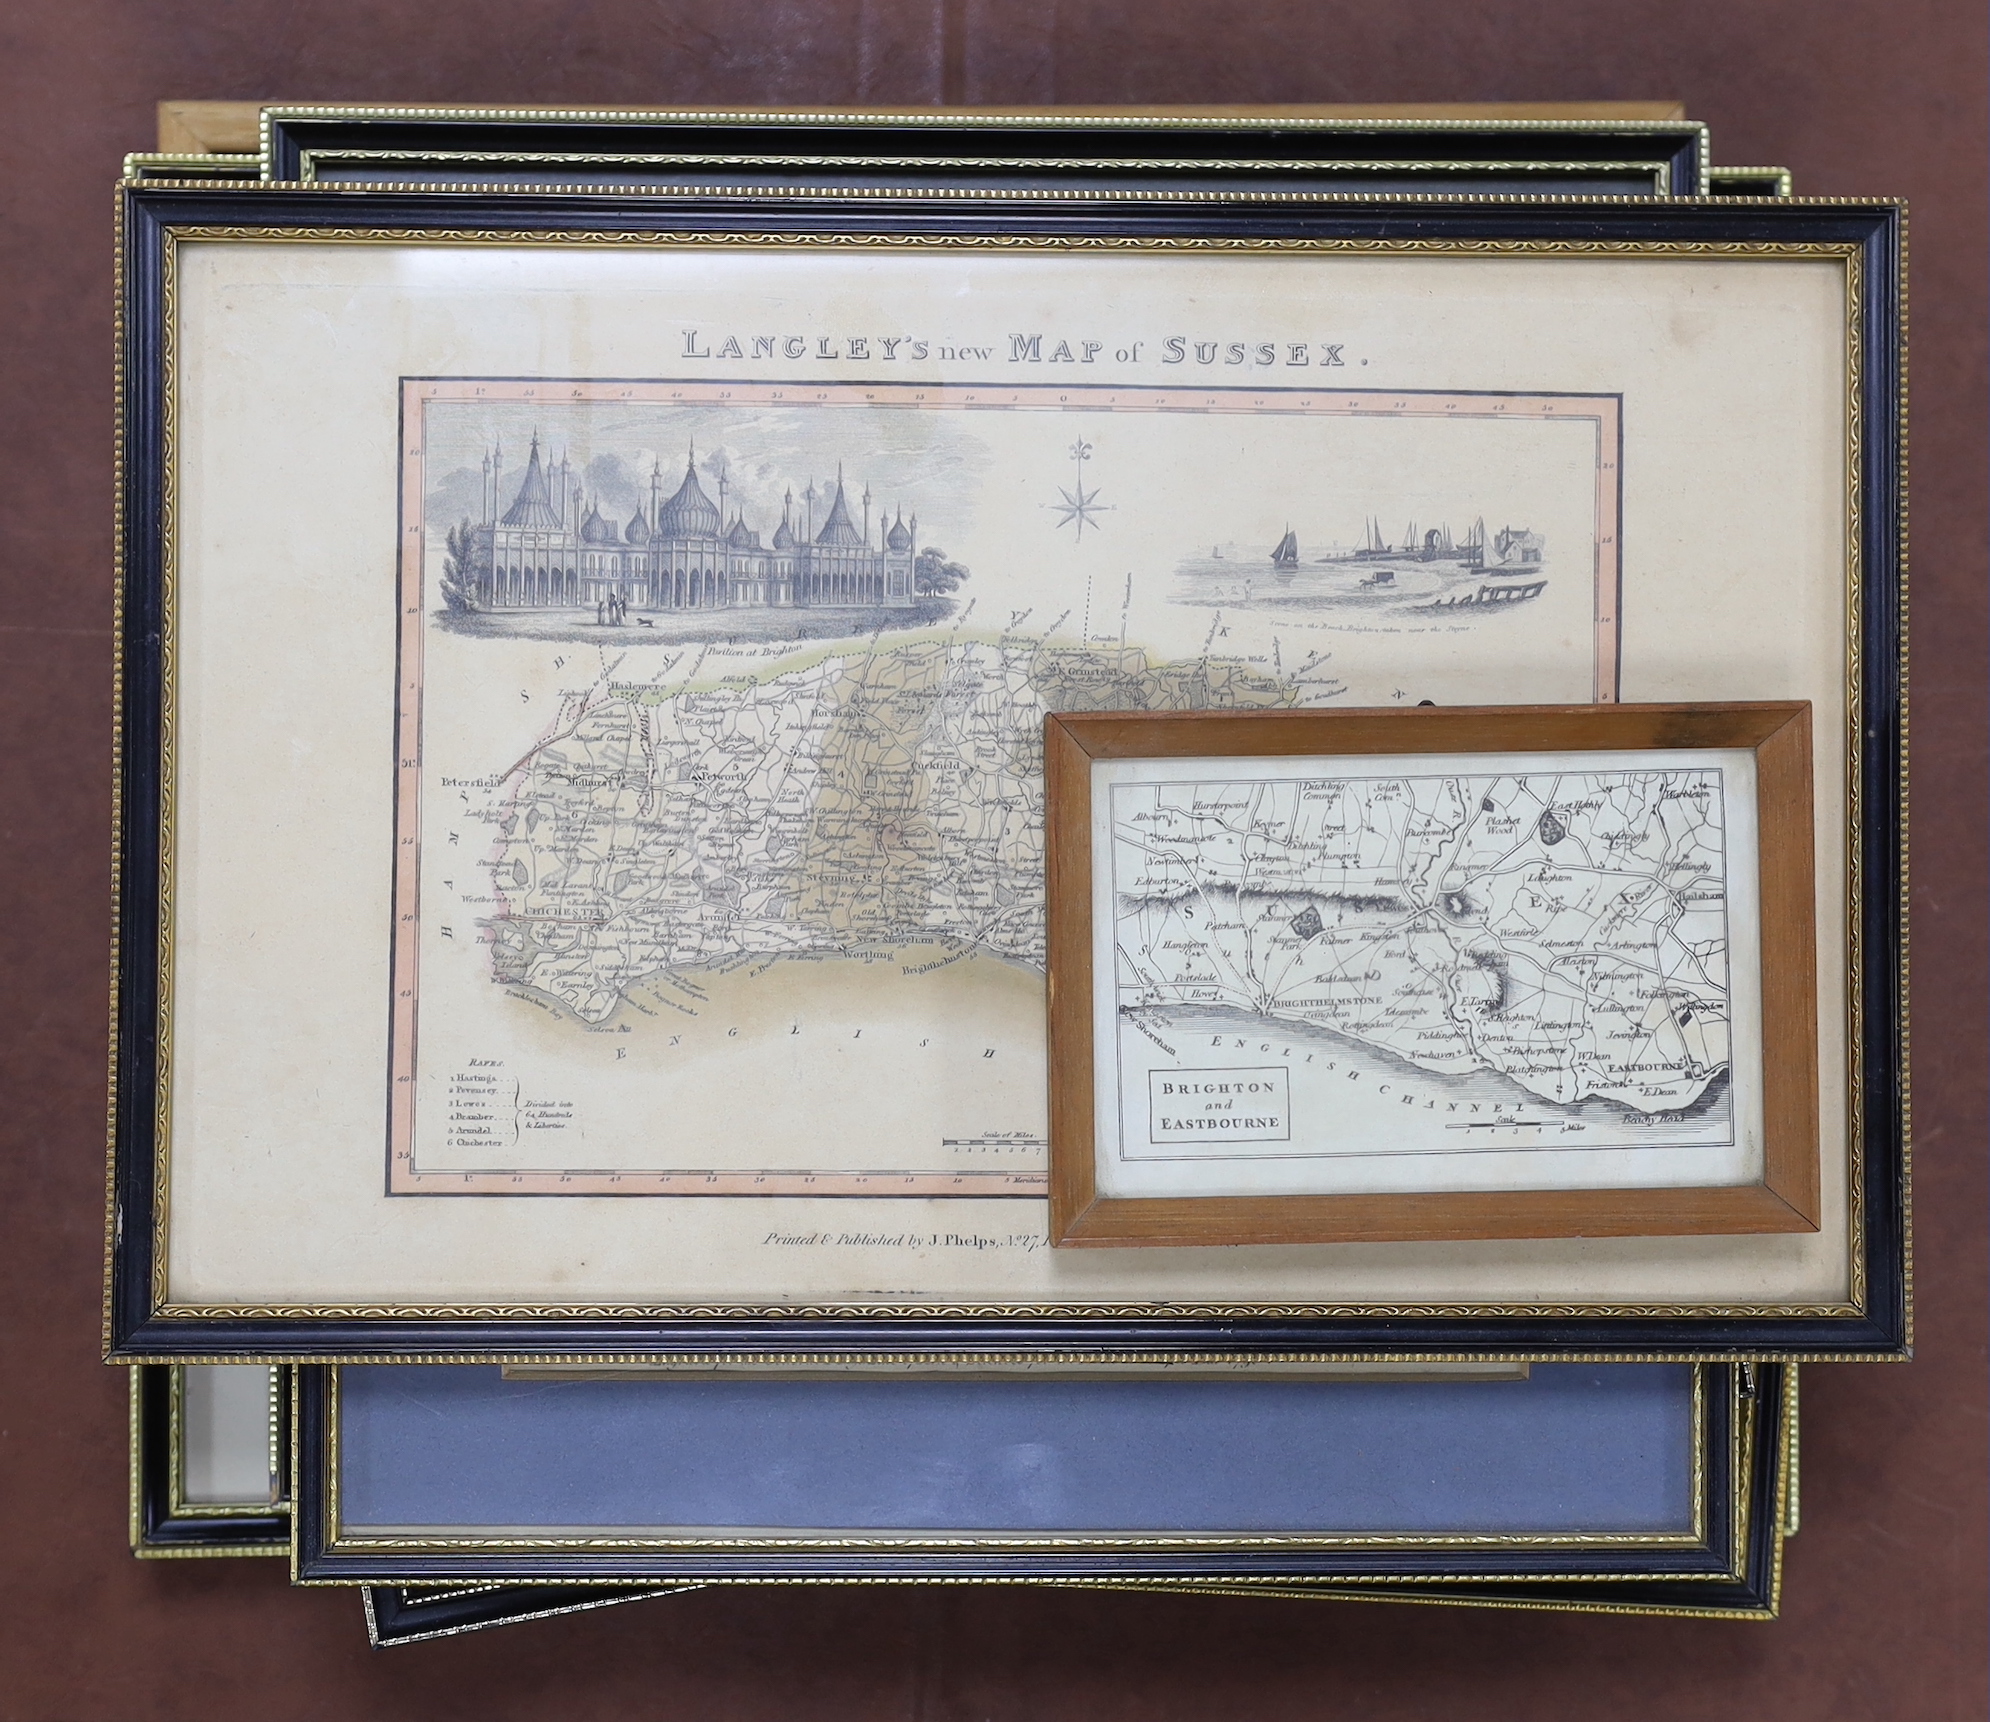 Eight framed 18th and 19th century maps of Sussex, etc., including maps by; Langley, Eman Bowen, Cary, etc. largest 22 x 27cm                                                                                               